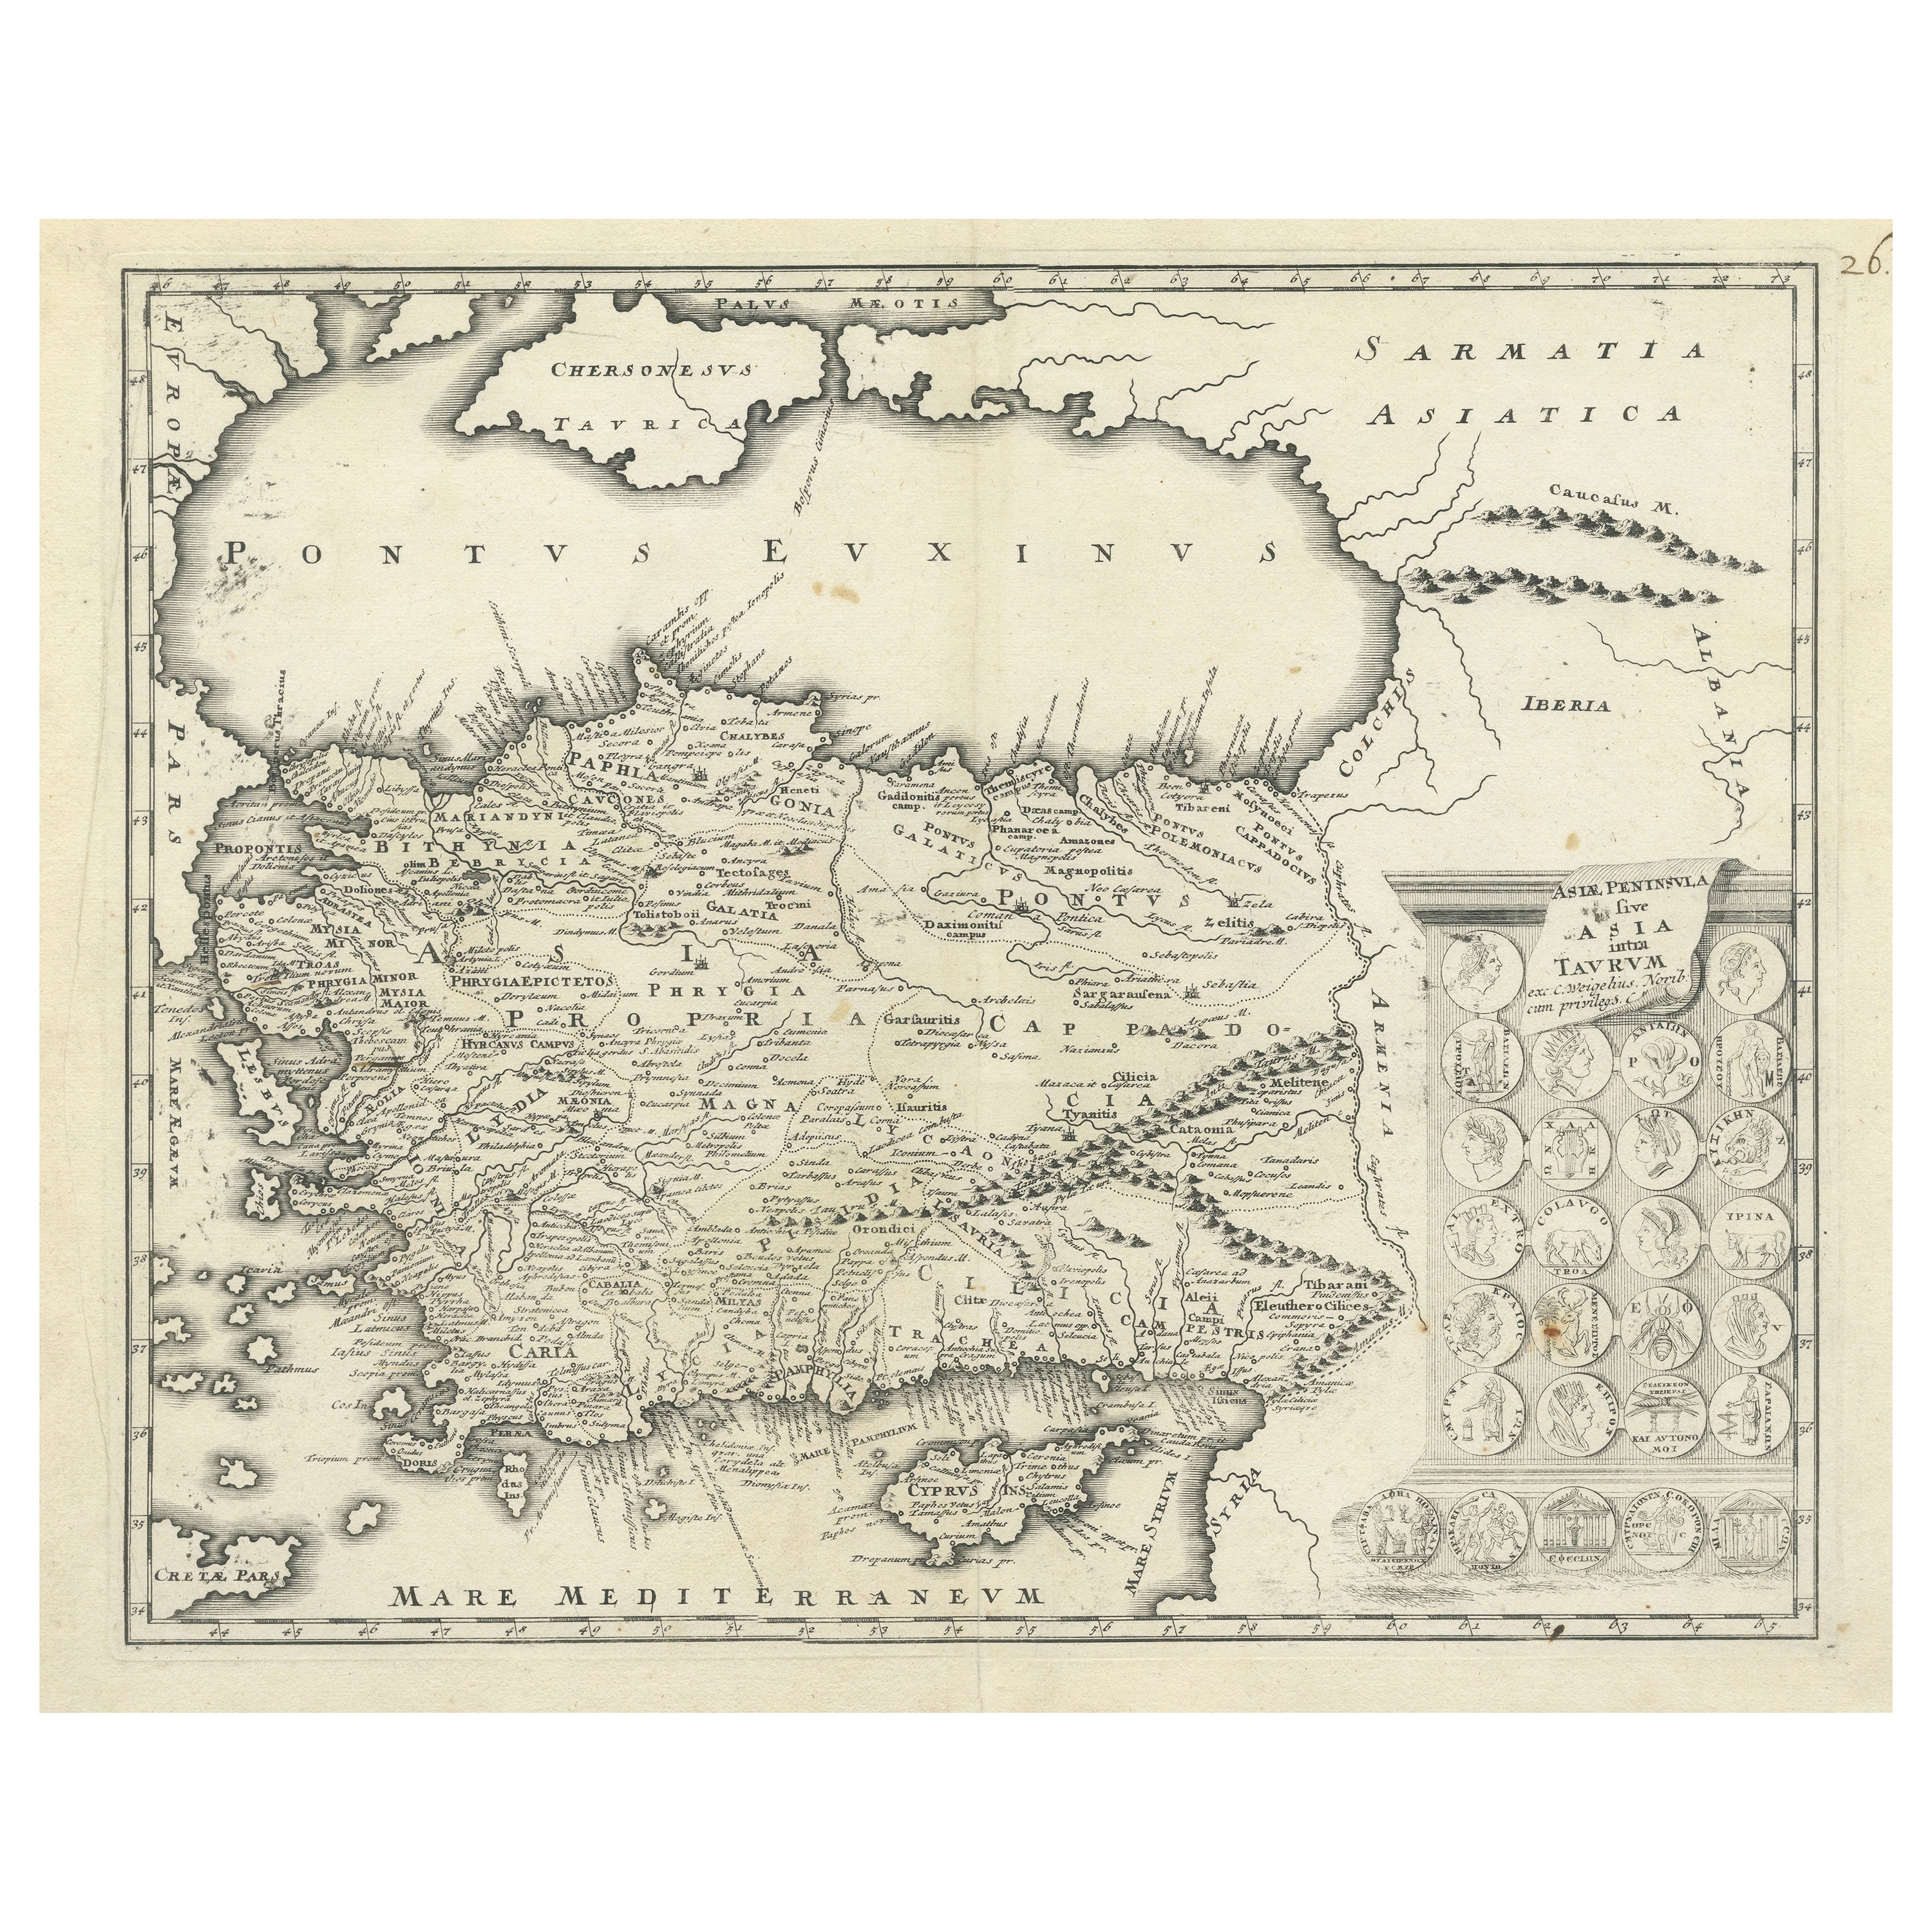 Antique Map of Cyprus and Asia Minor with Medallions and Vignettes